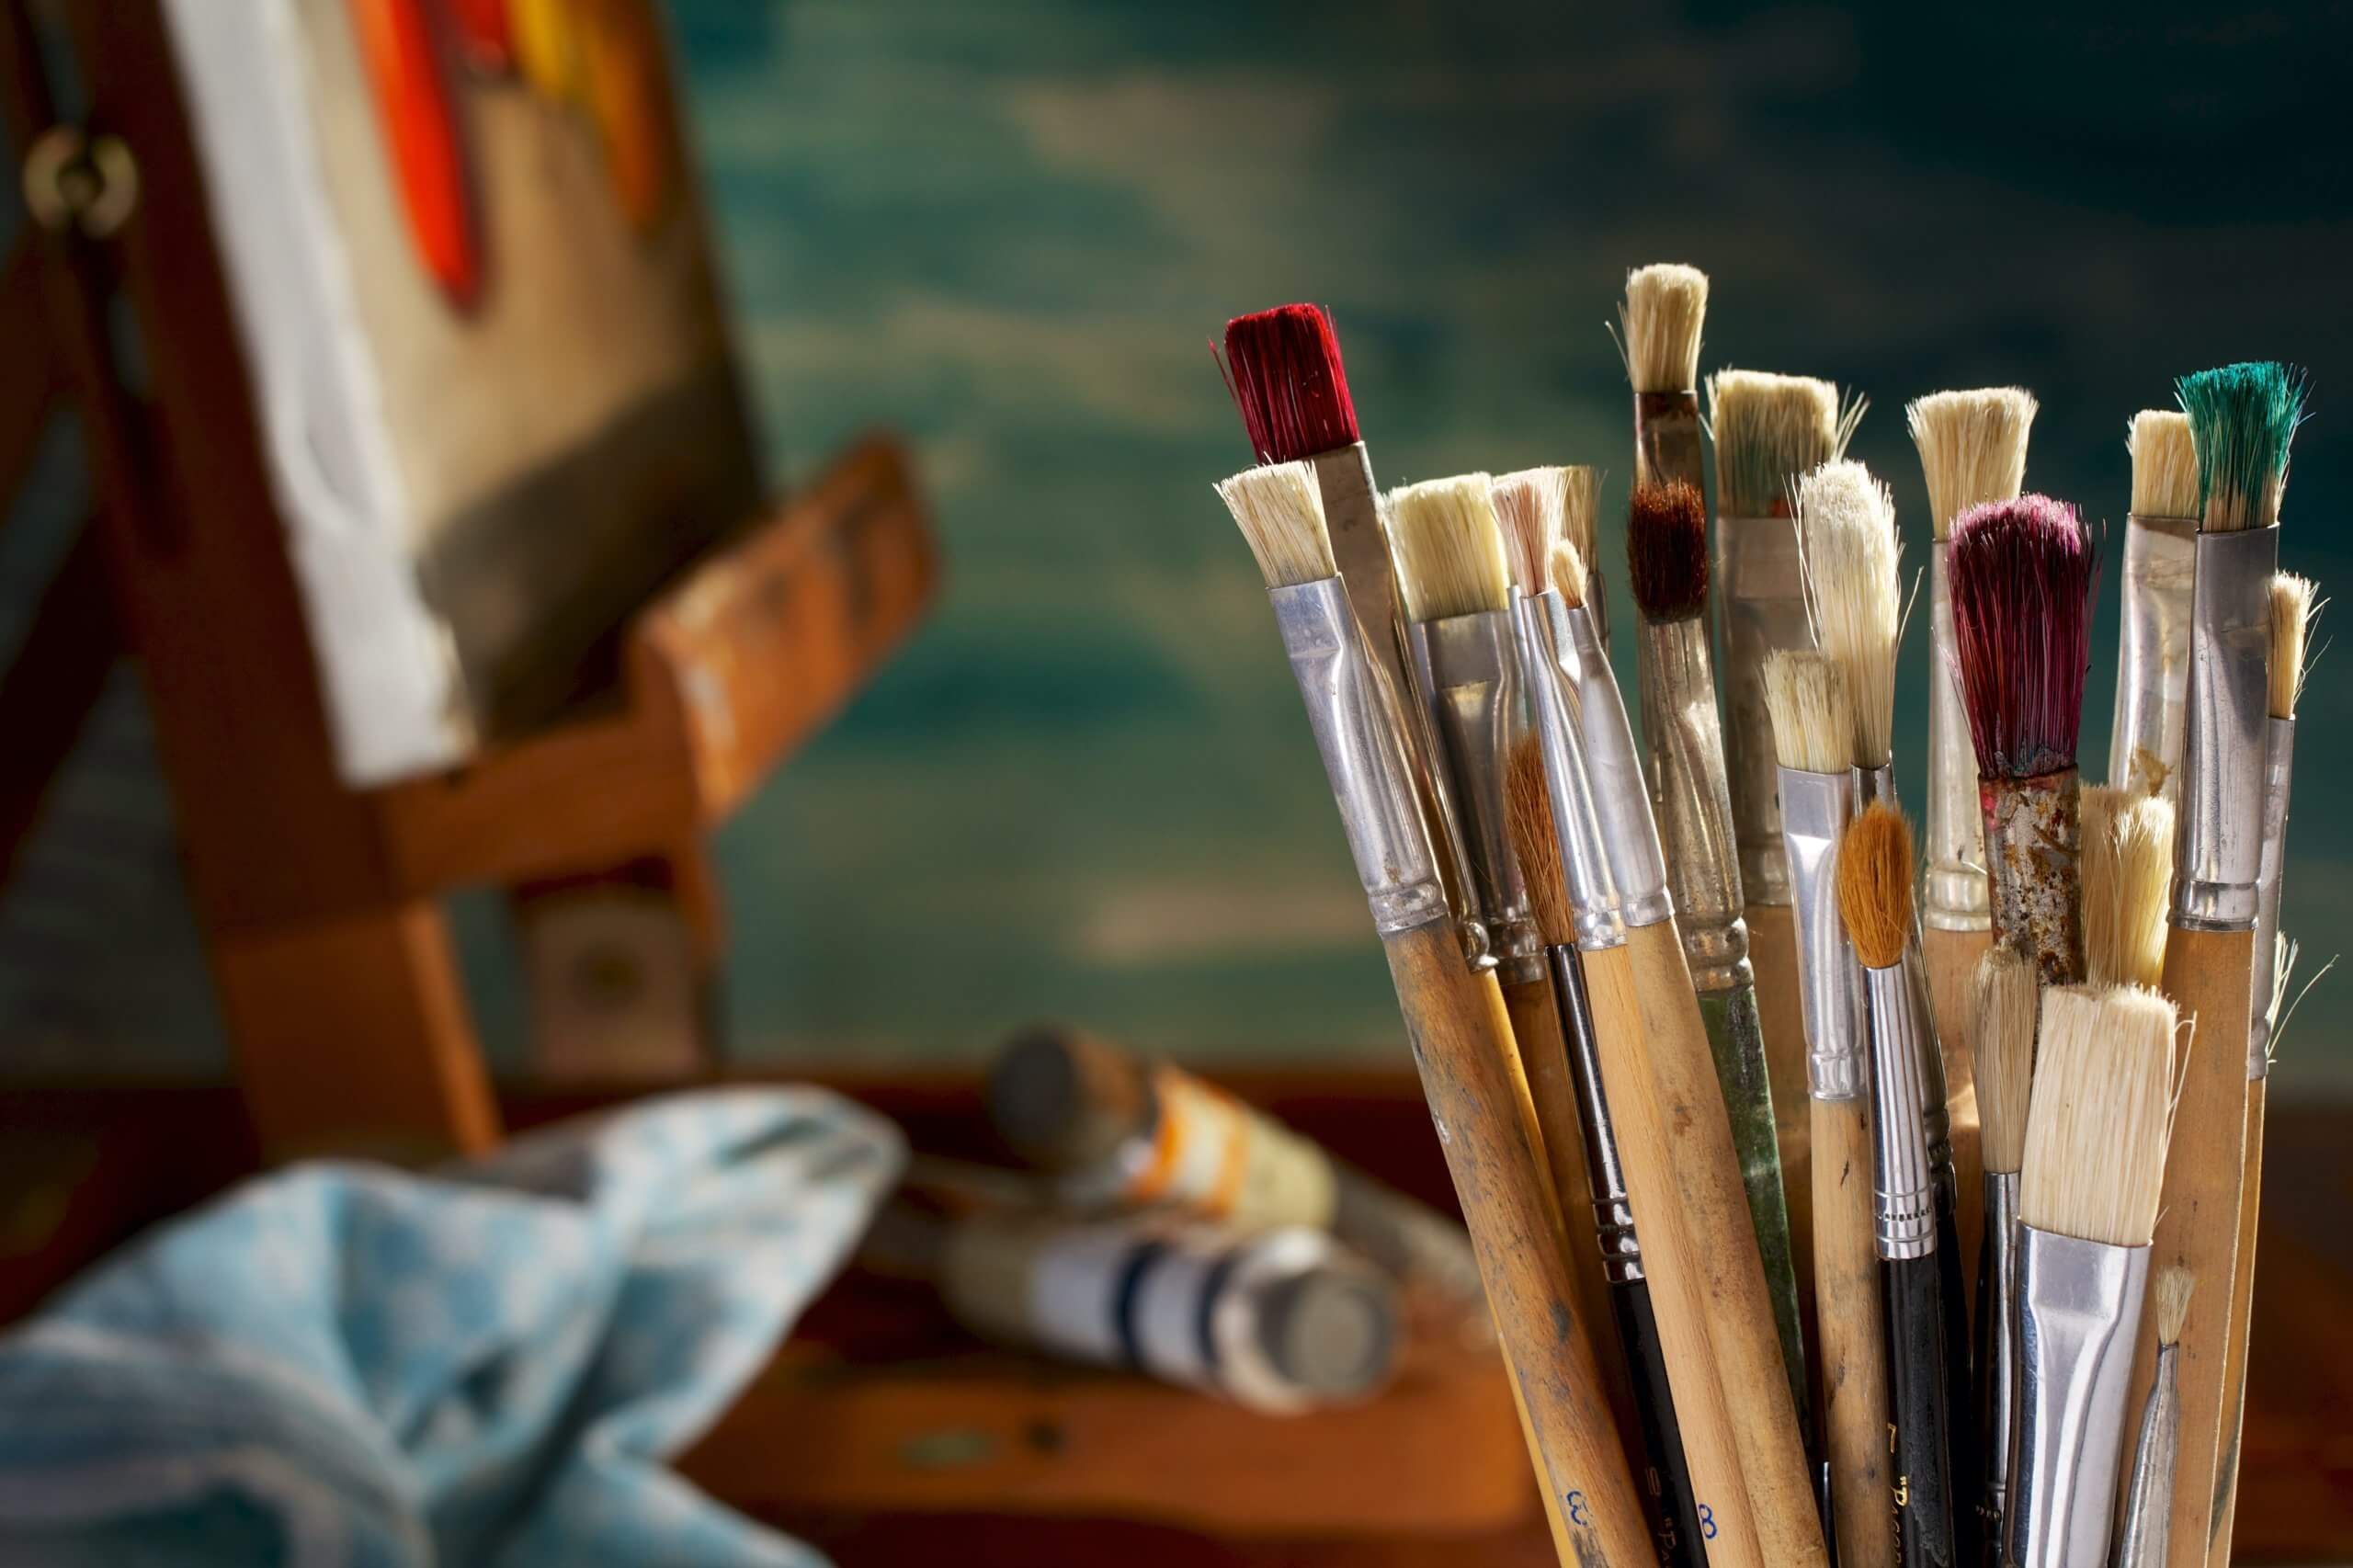 A Complete List of Oil Painting Supplies that every Beginning Oil